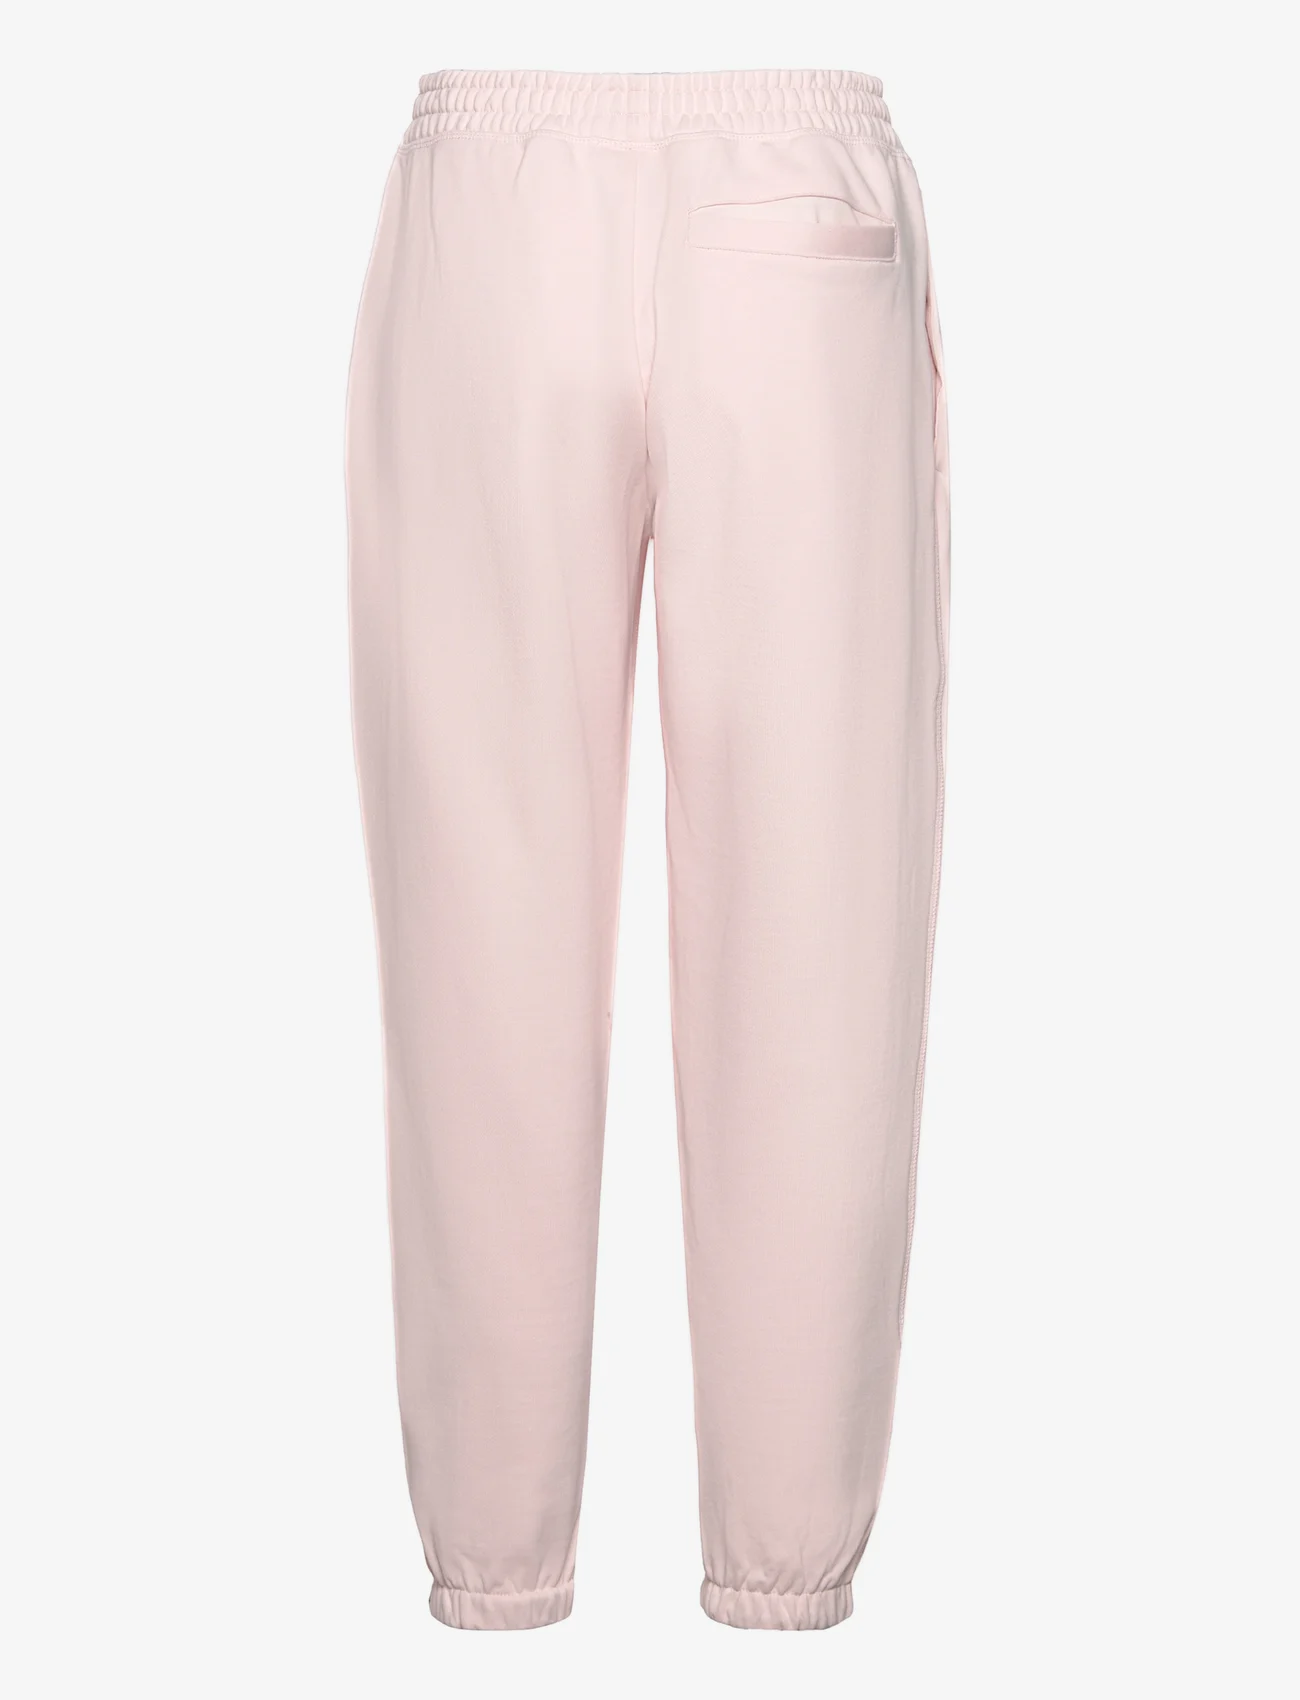 New Balance - Athletics Nature State French Terry Sweatpant - damen - washed pink - 1